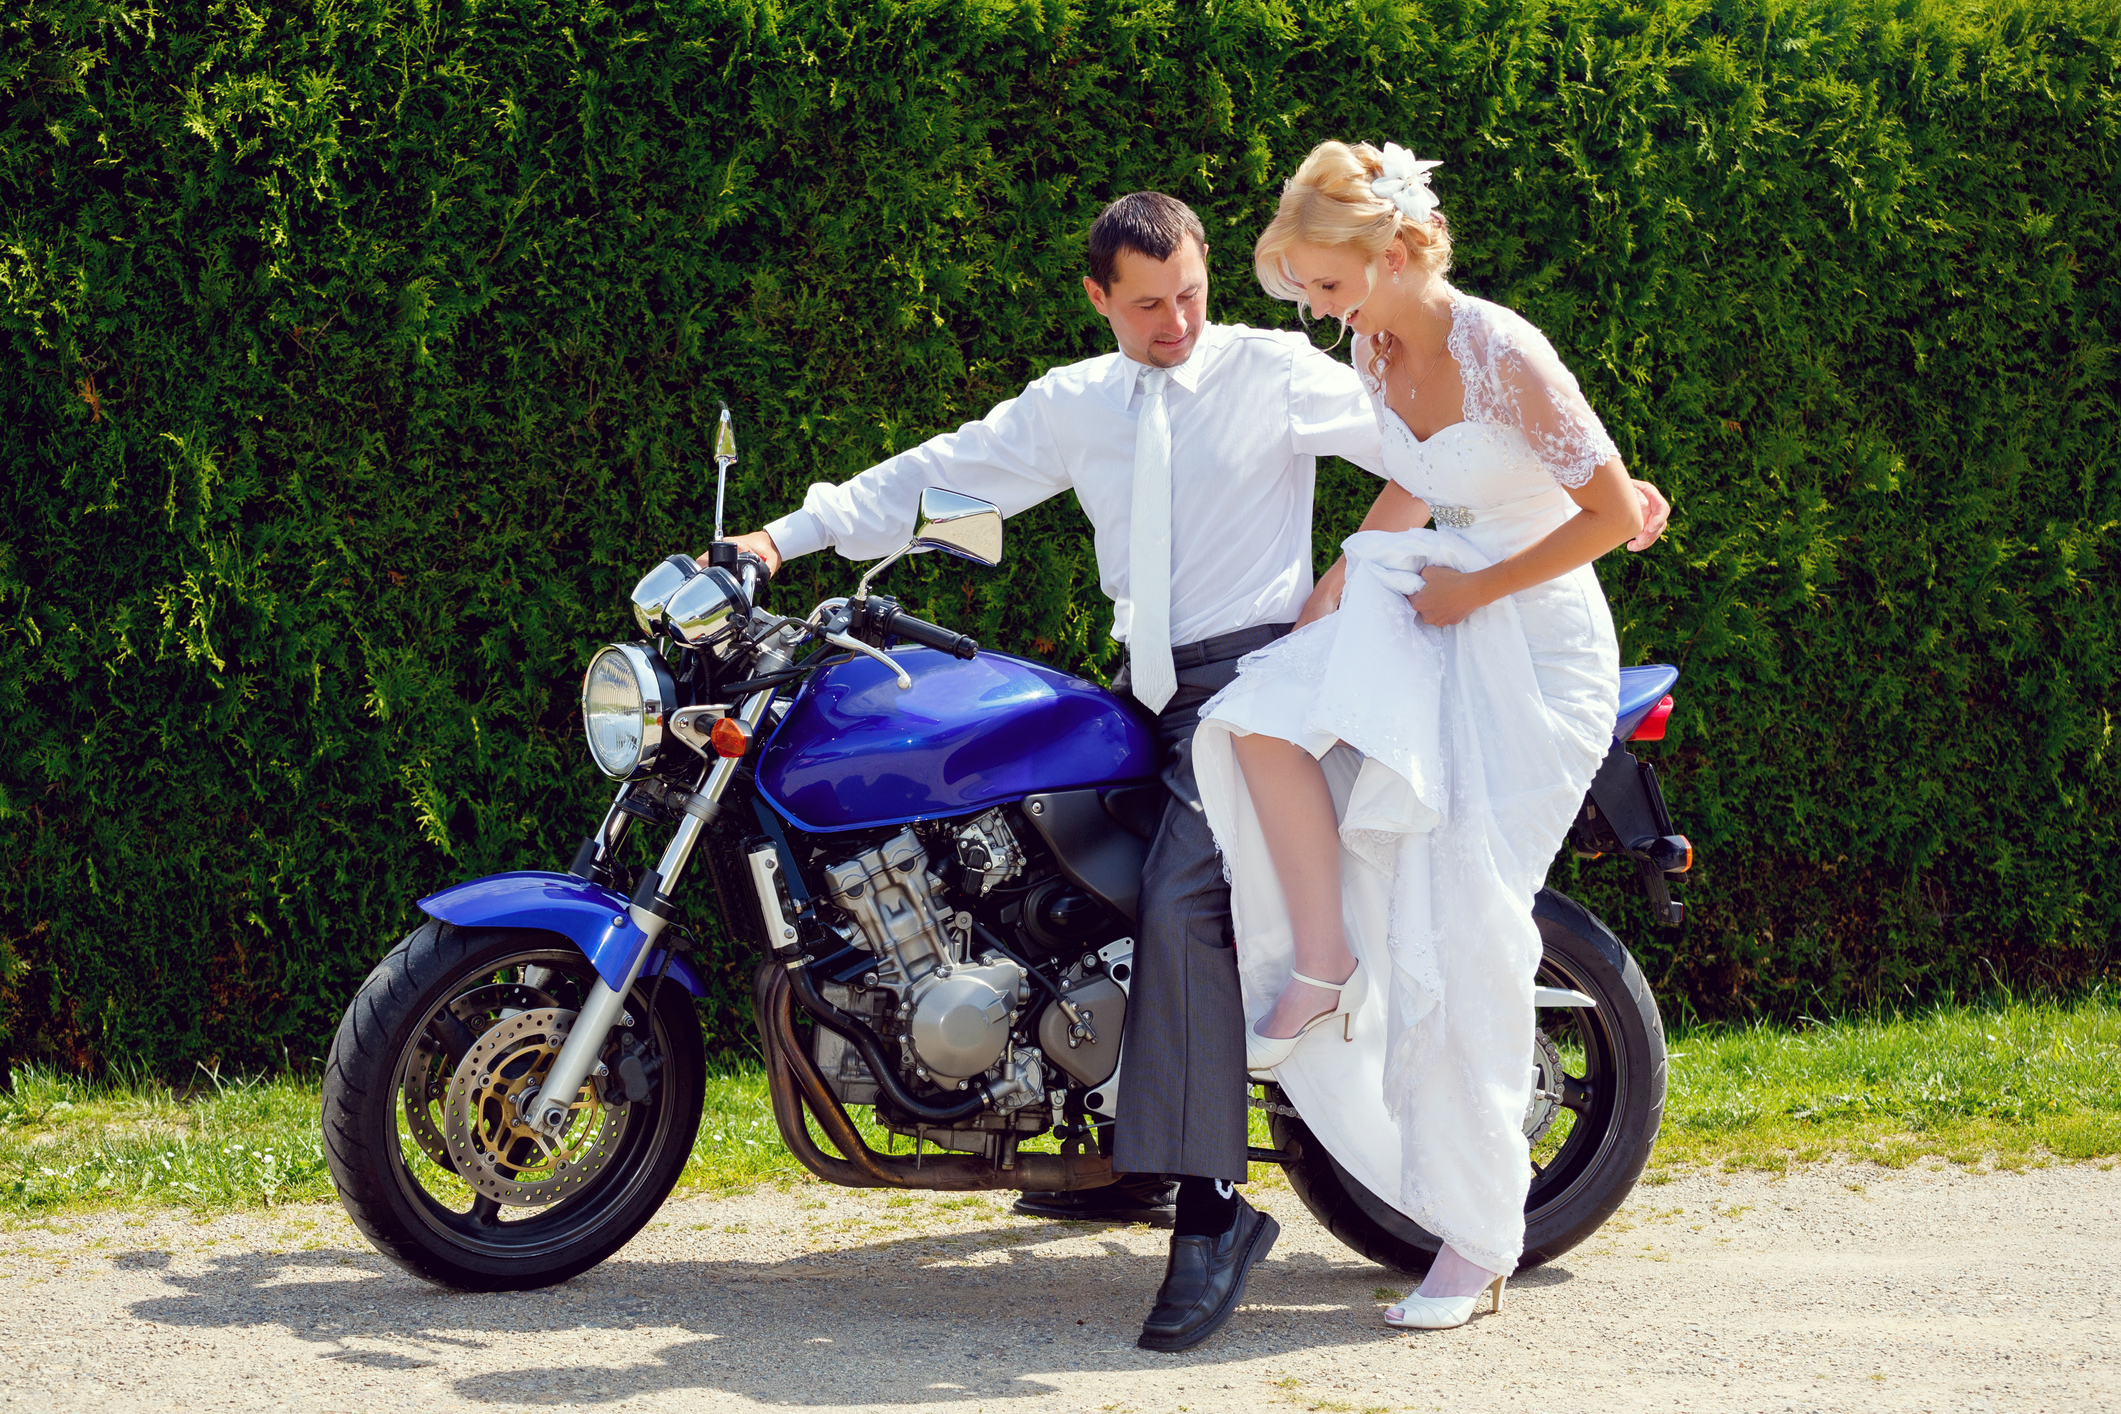 Bride and groom getting on motorcycle on wedding day